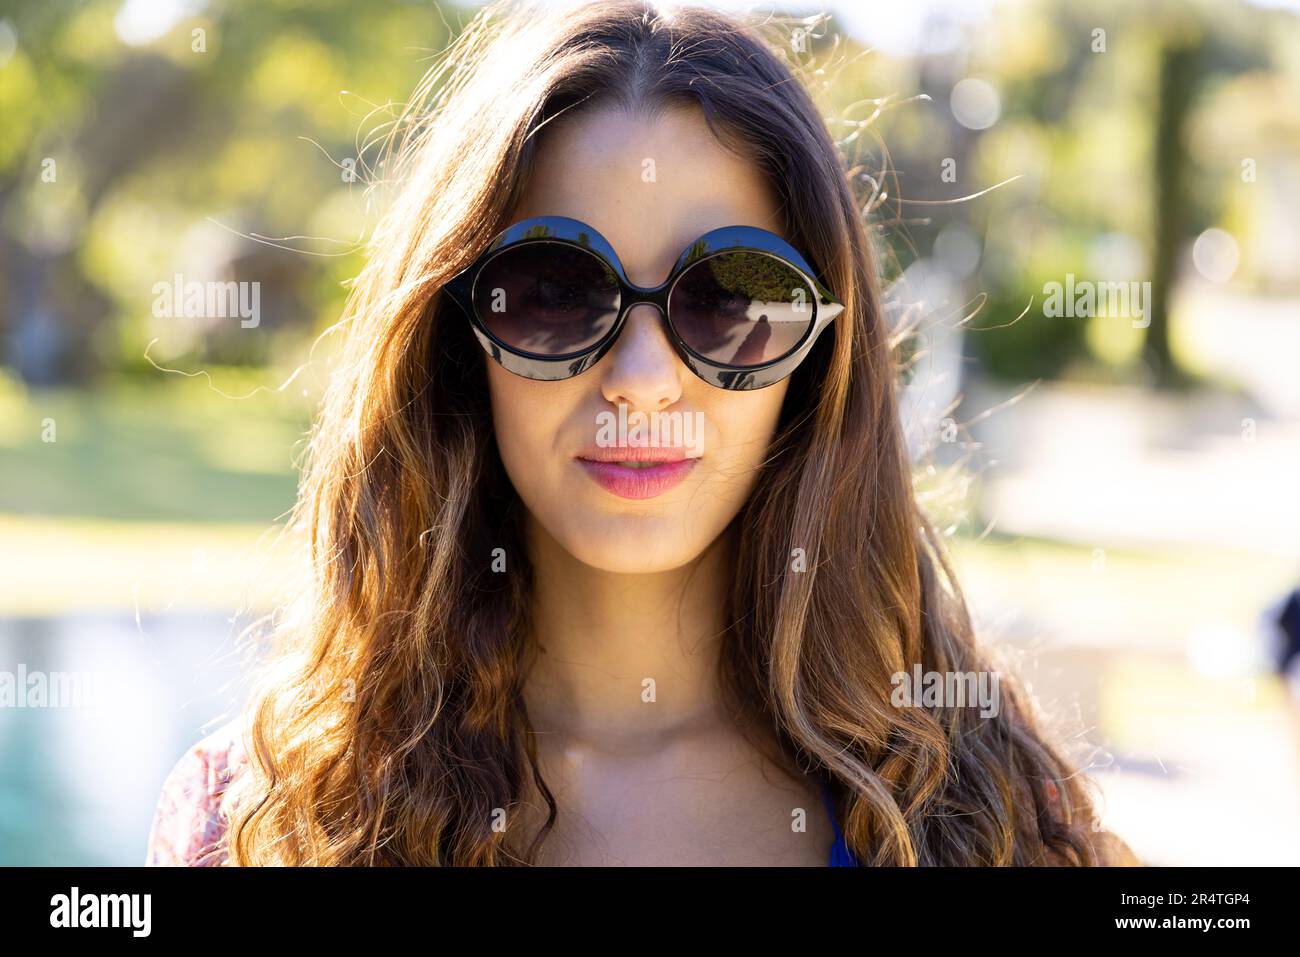 Close-up portrait of biracial attractive young woman wearing sunglasses and posing in yard Stock Photo